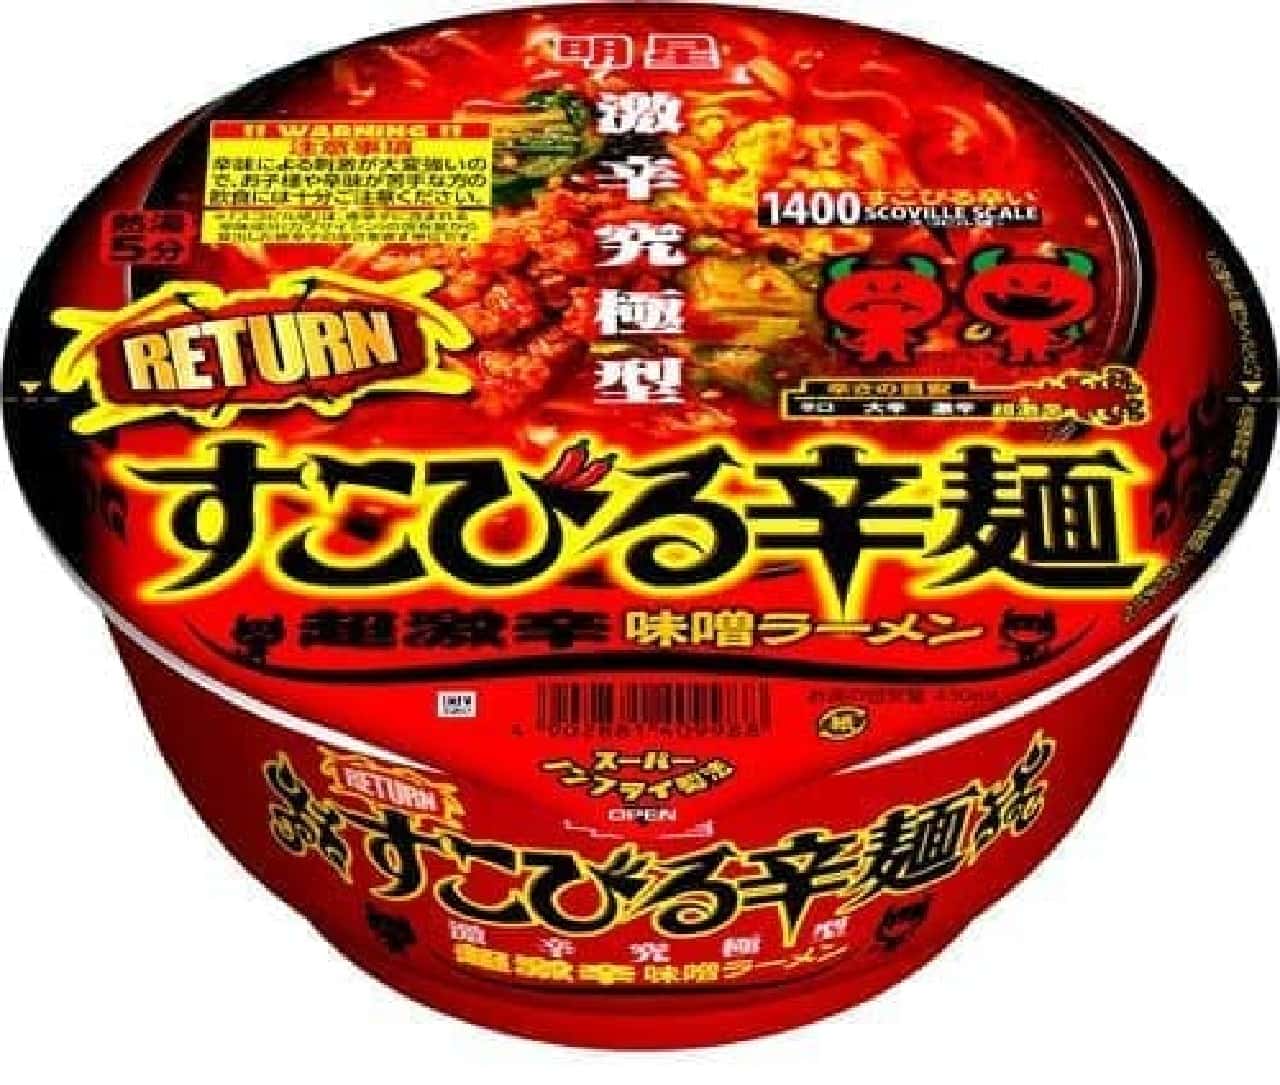 1,400 Scoville spicy cup noodles!